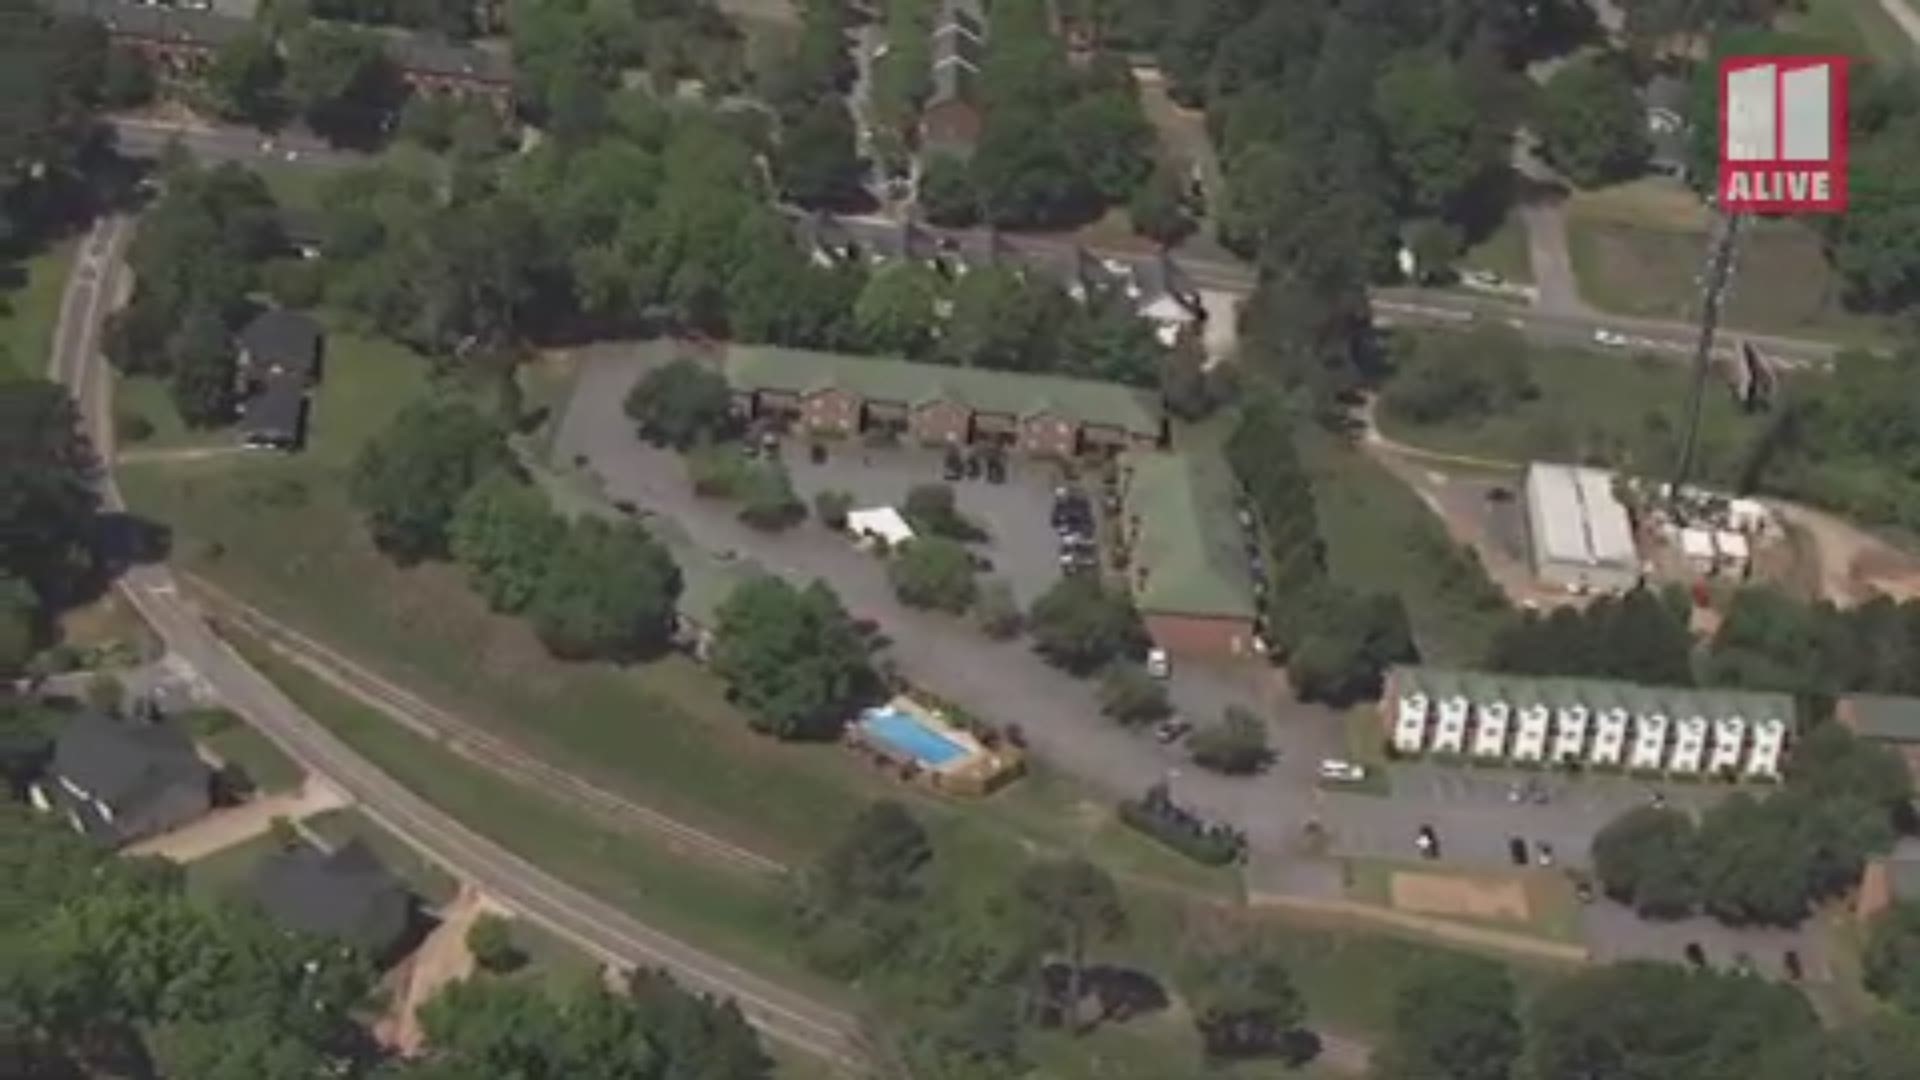 An aerial view of the scene where police say a UGA student was shot on April 22.